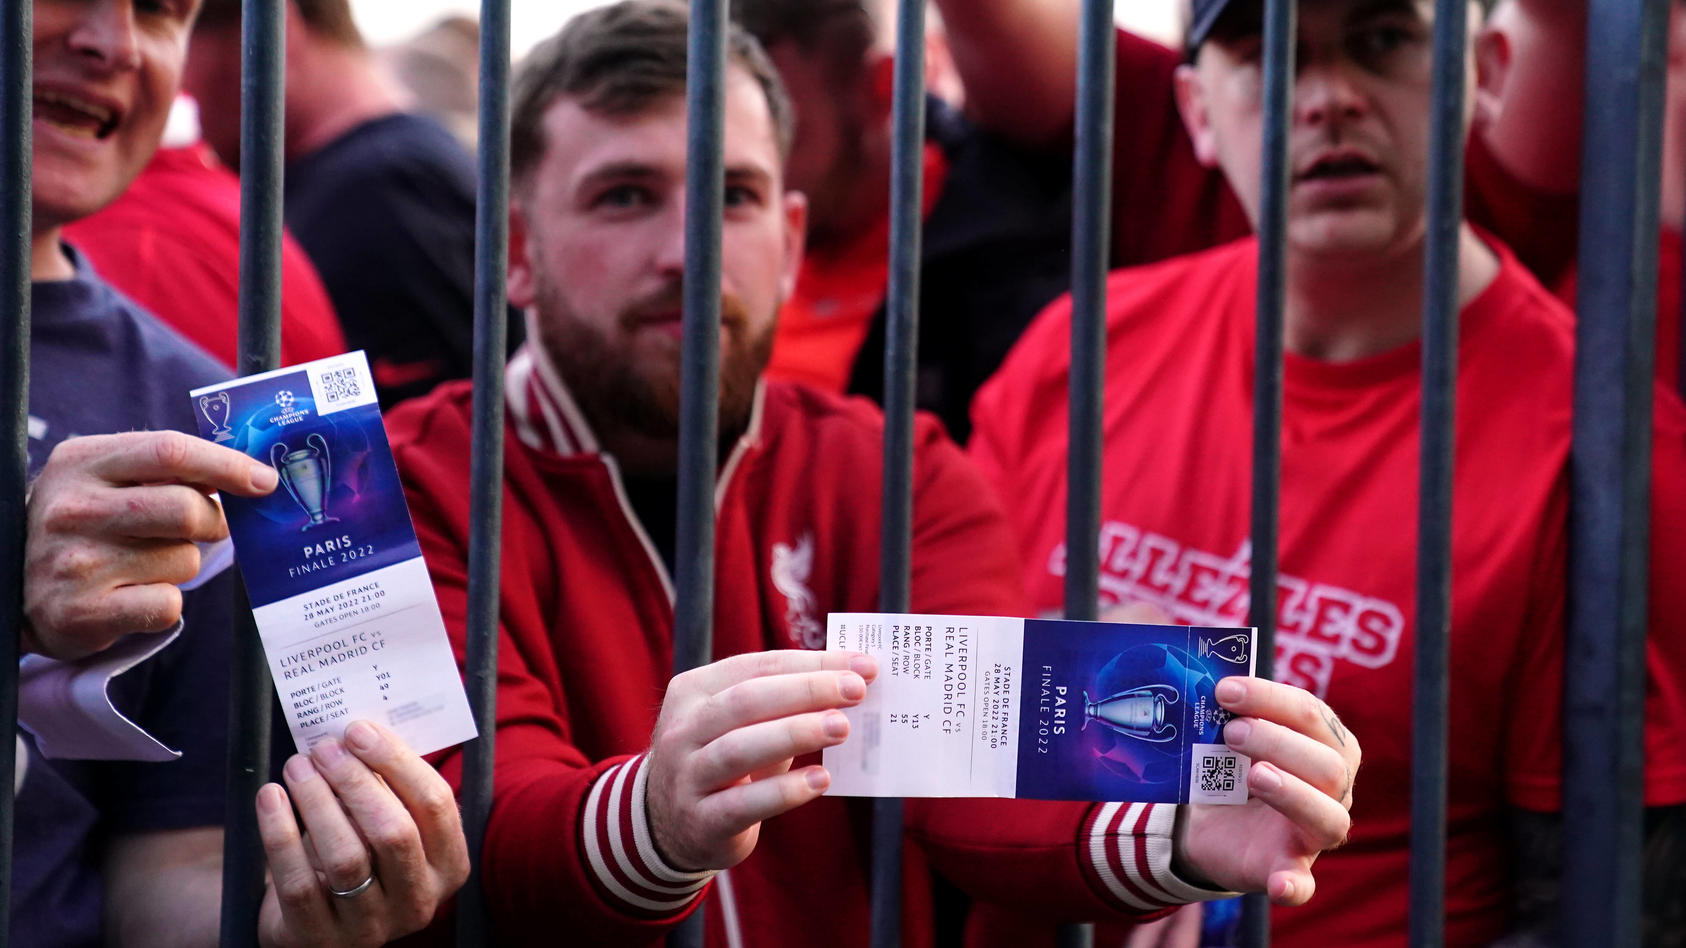 Fußball, CL Finale, FC Liverpool - Real Madrid, Probleme beim Einlassen der Fans Liverpool v Real Madrid - UEFA Champions League - Final - Stade de France Liverpool fans stuck outside the ground show their match tickets during the UEFA Champions Leag